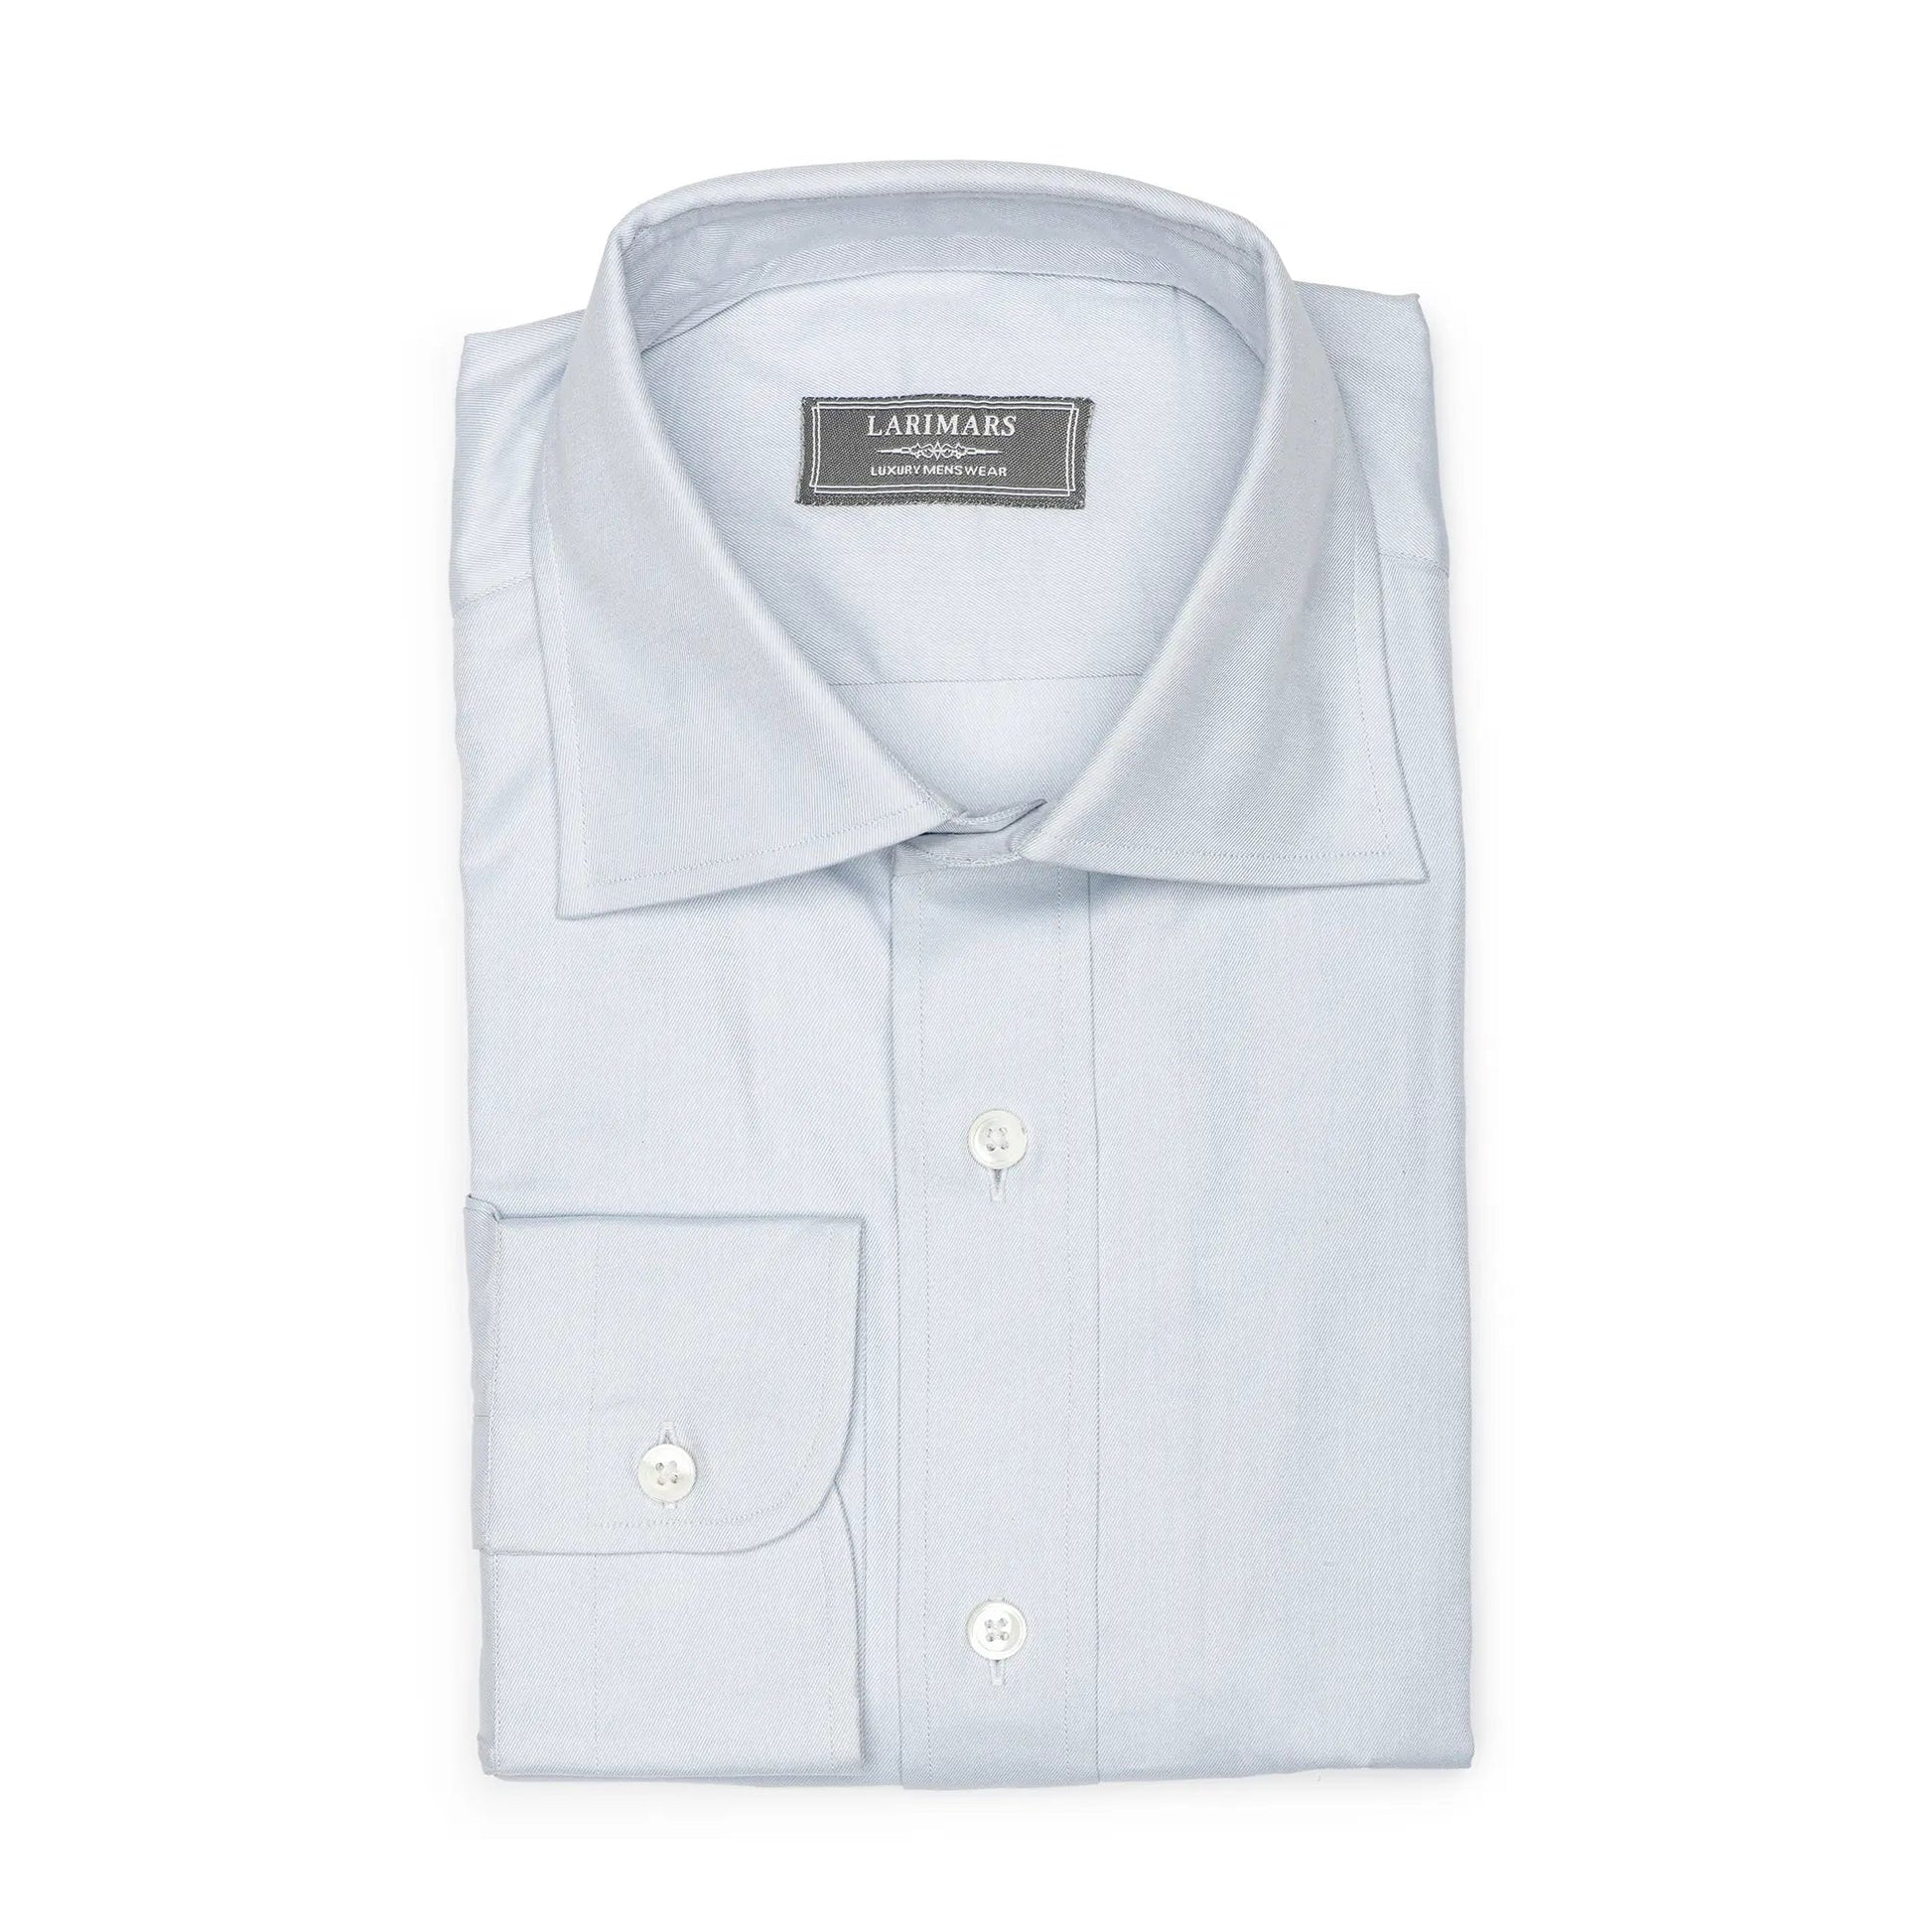 Light Blue Fine Twill - Larimars Clothing Men's Formal and casual wear shirts